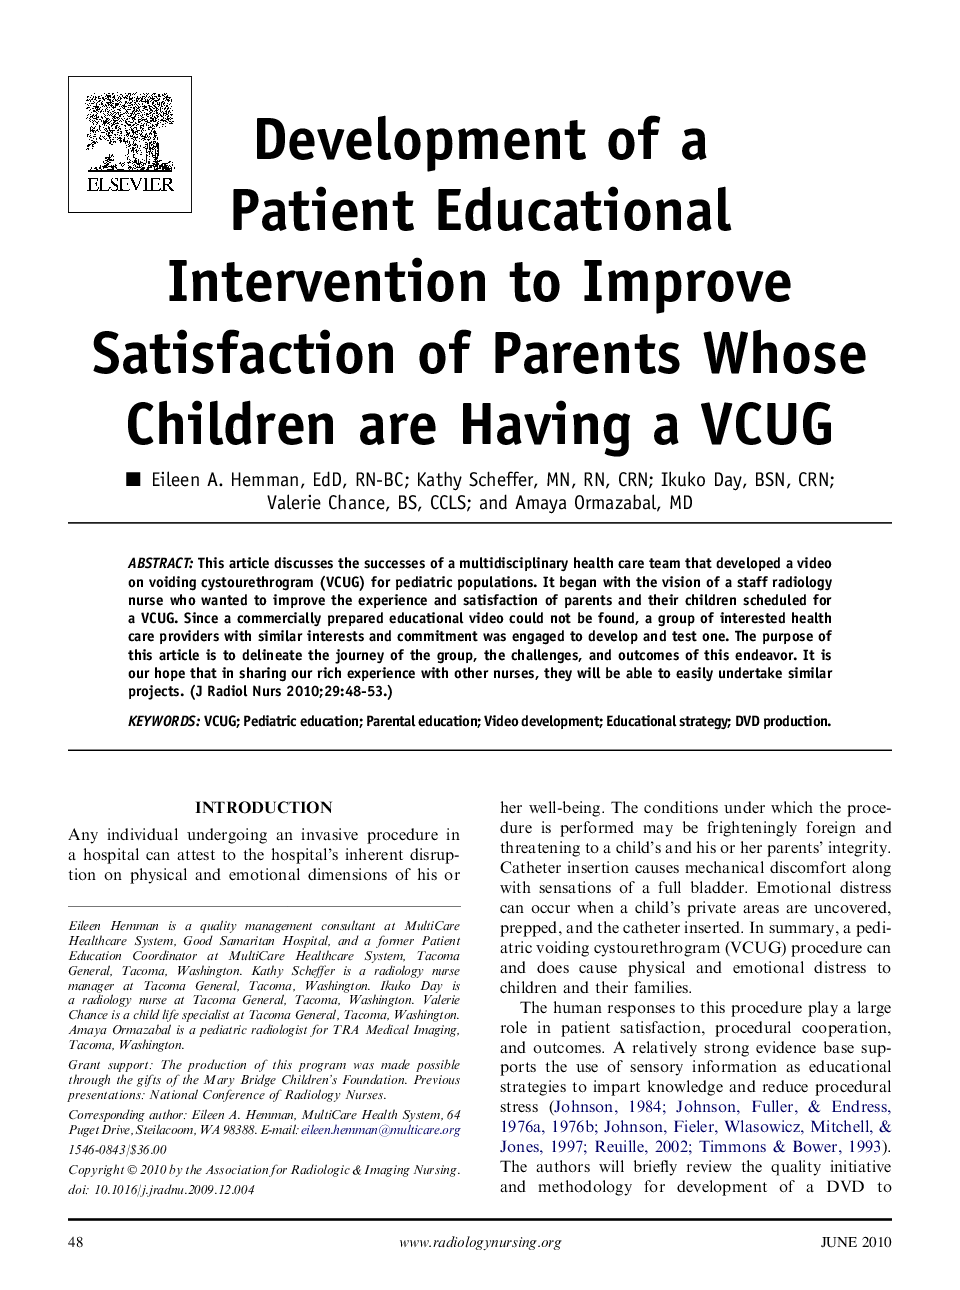 Development of a Patient Educational Intervention to Improve Satisfaction of Parents Whose Children are Having a VCUG 